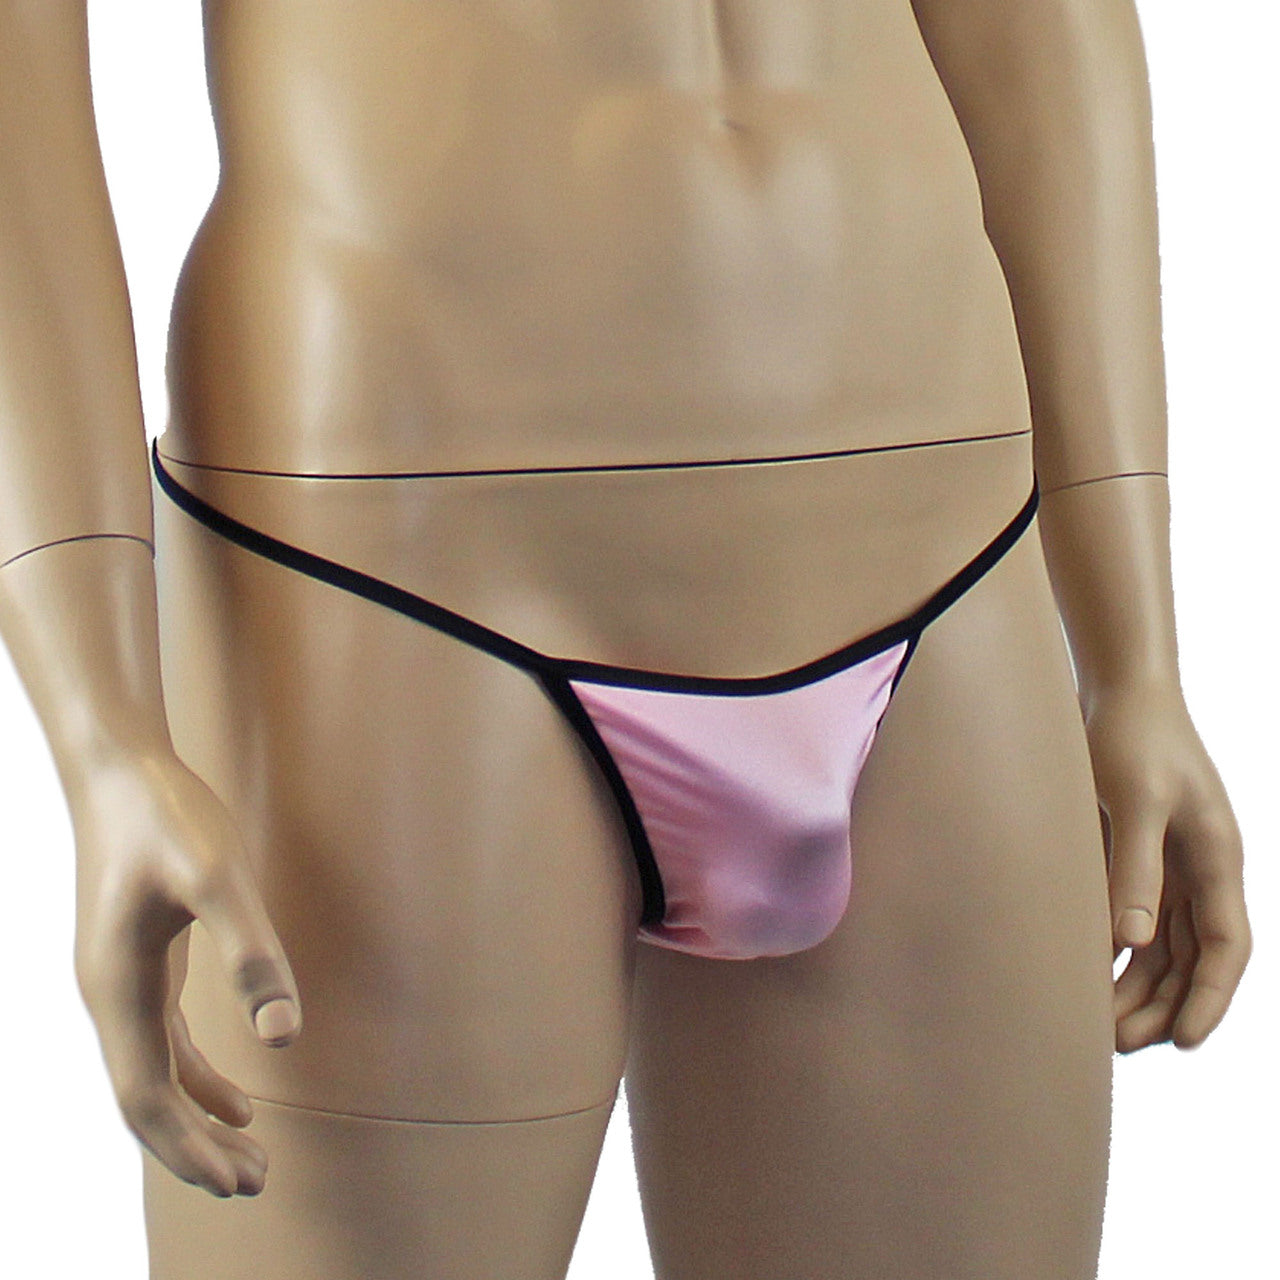 Mens Twinkle Lingerie Spandex Mini G string with Bow, Light Pink & Black